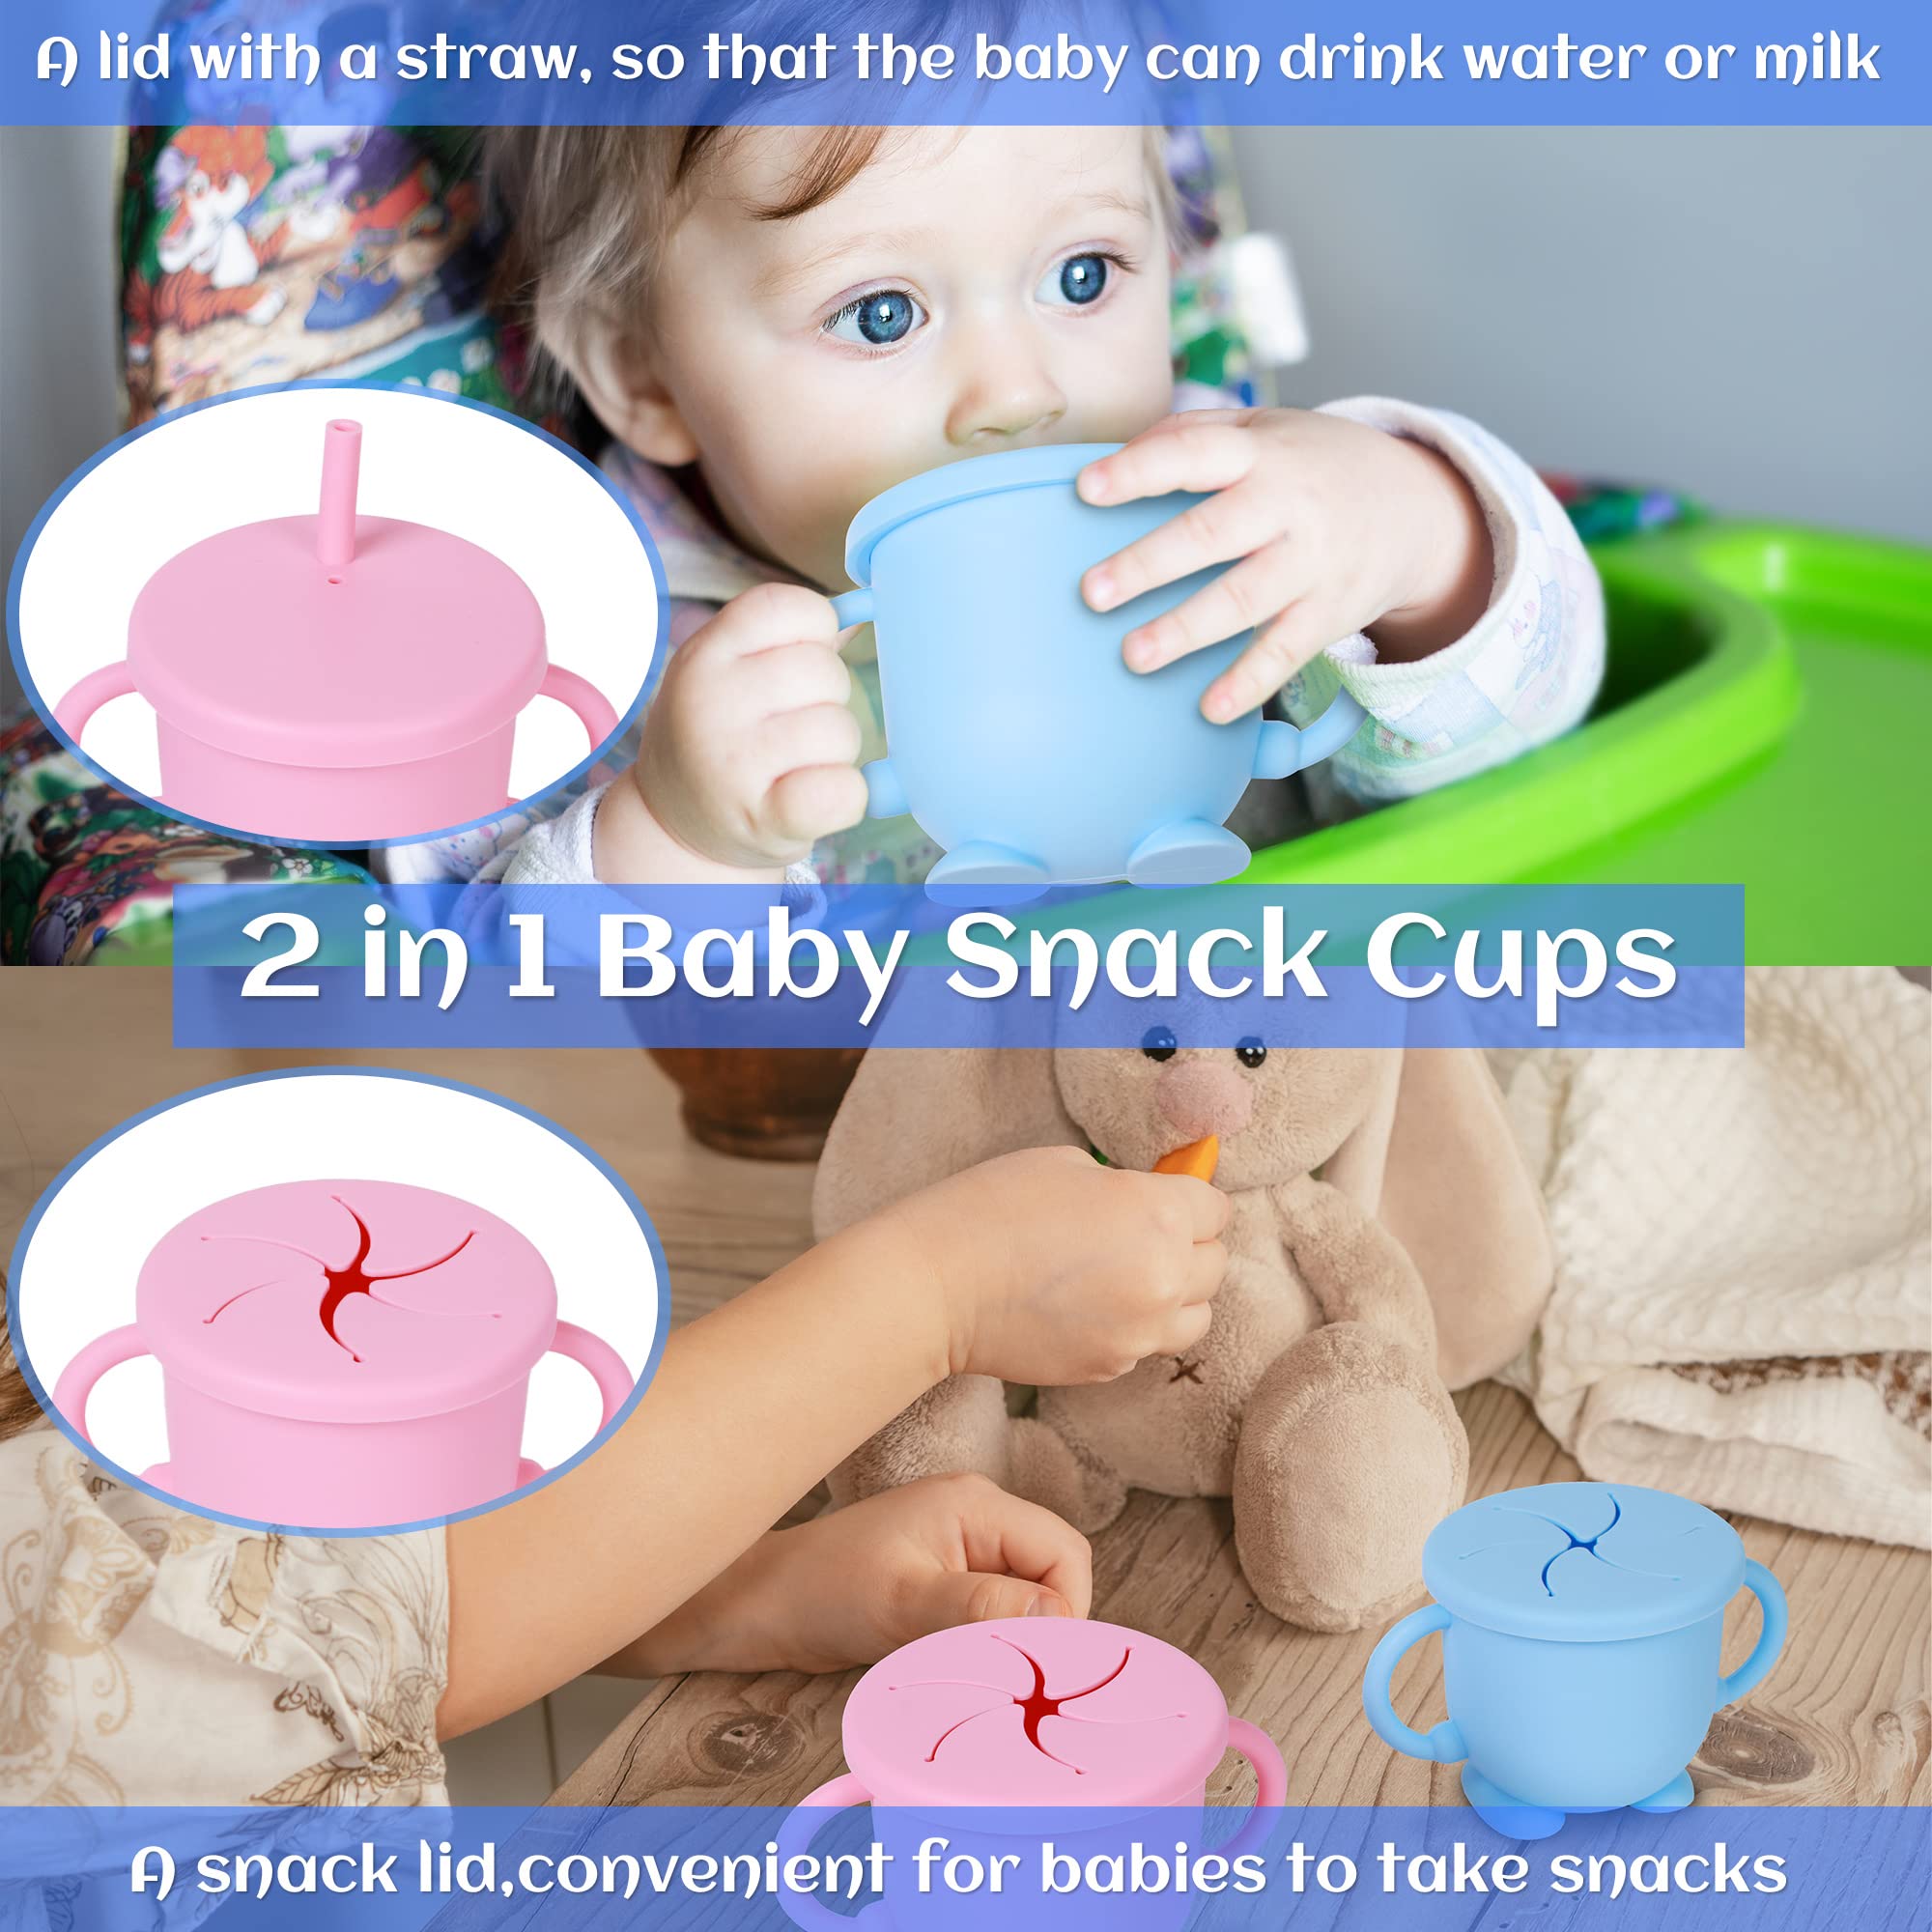 Mytium Snack Cups for Toddlers,2 in 1 Silicone Snack Cup+Straw with Adjustable Strap,2PCS No Spill Toddler Snack Containers Baby Training Cup for Toddler and Baby 6 Month+(Blue+Pink)